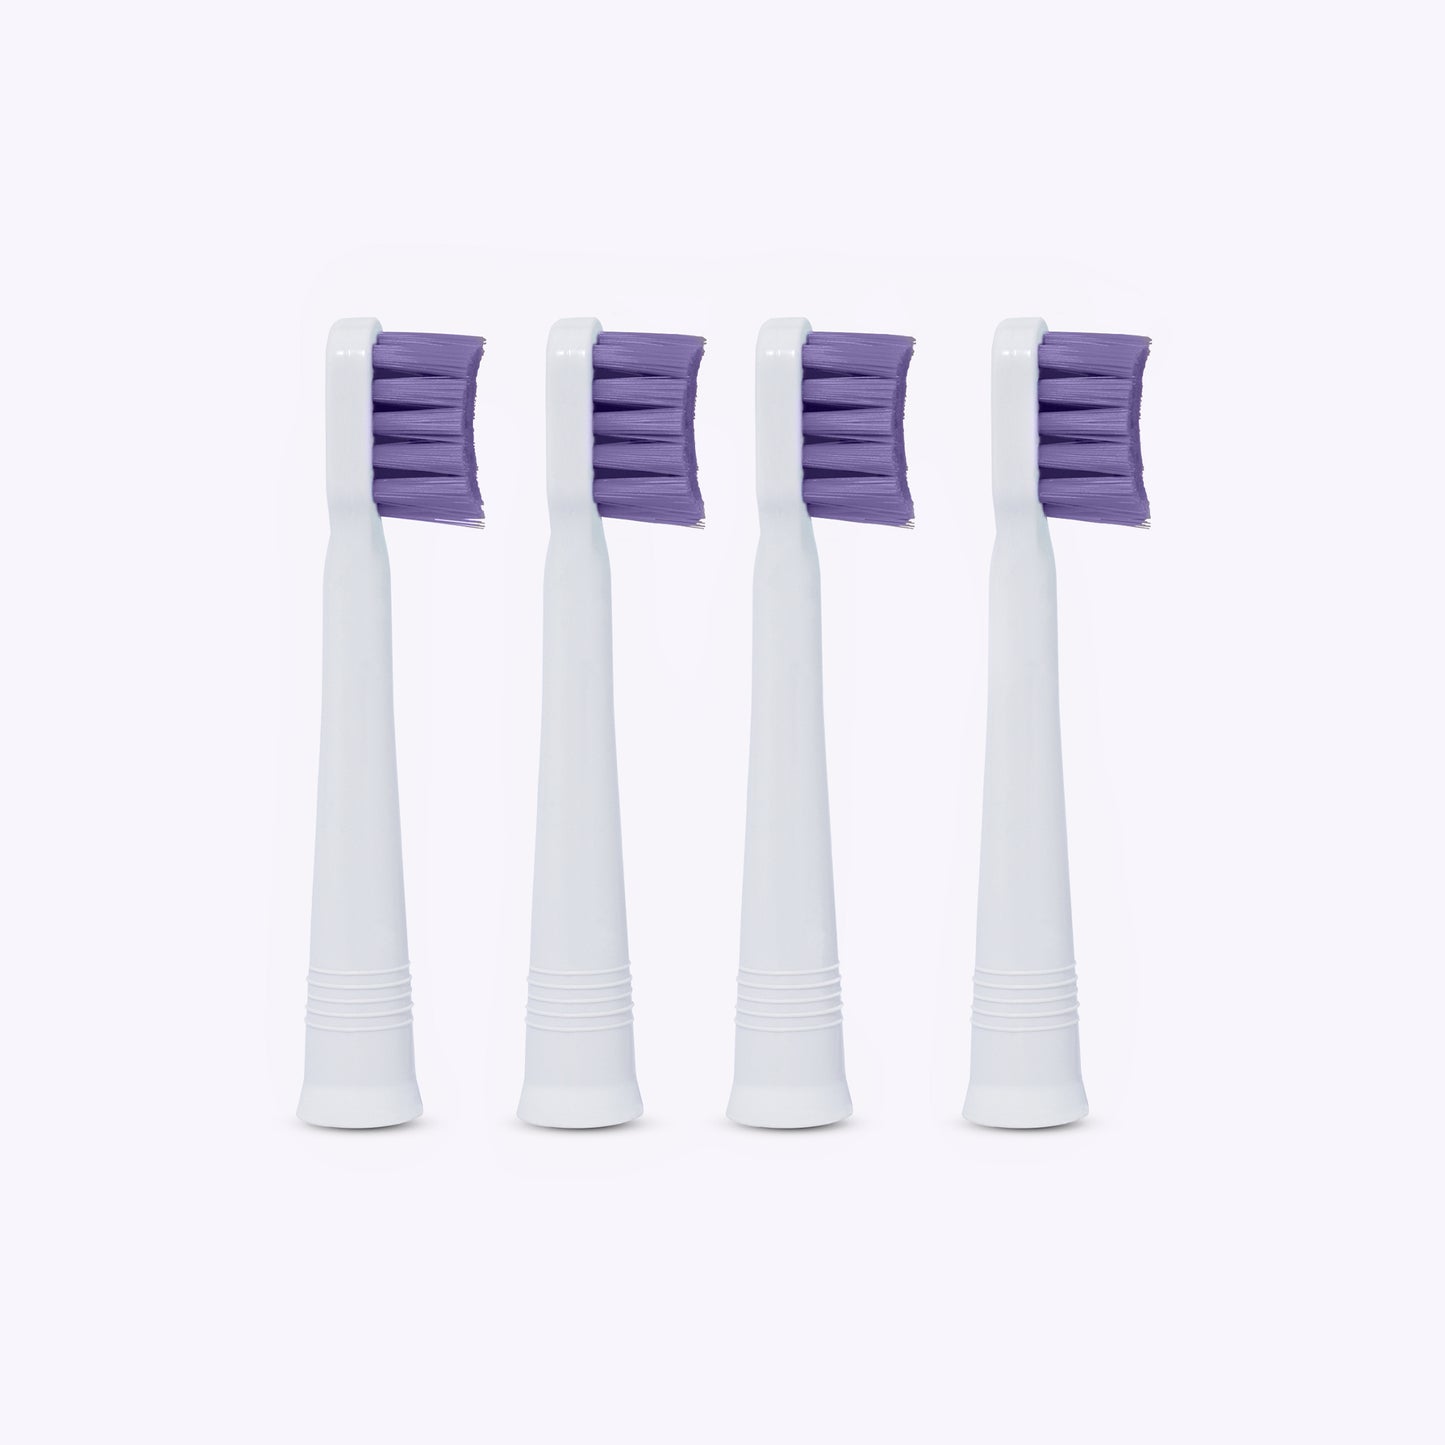 Toothbrush Heads for Ultrasonic Tooth Cleaner (1st Generation)